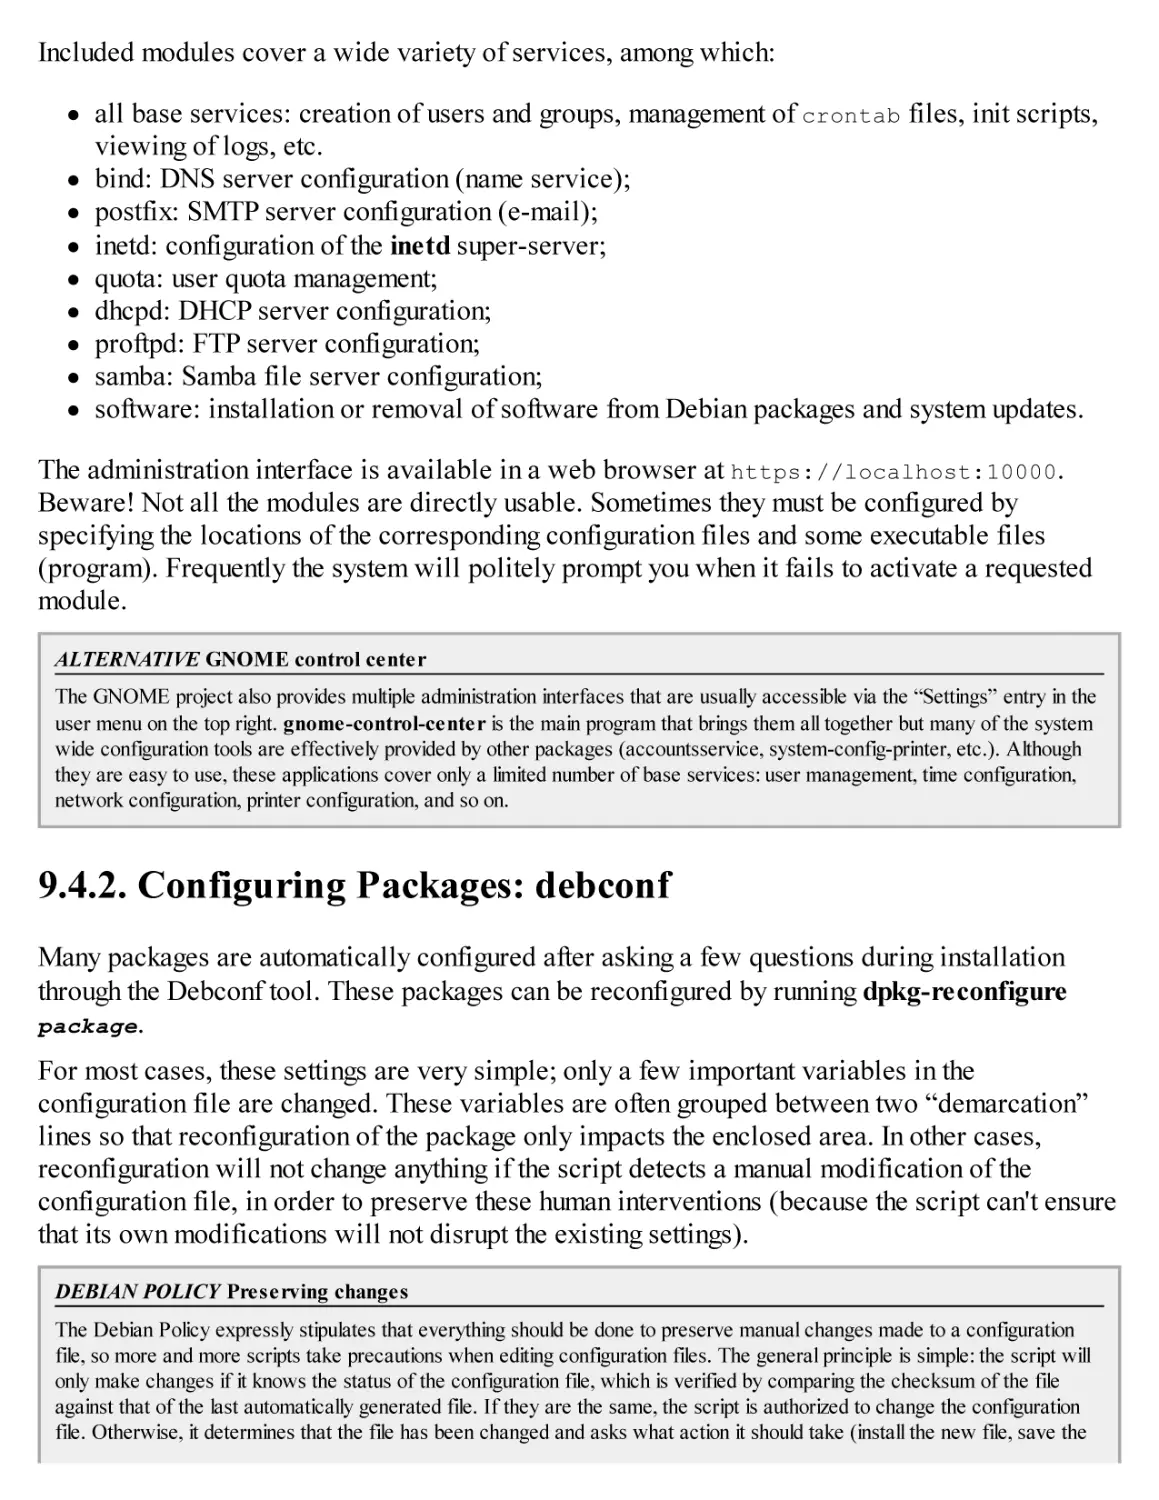 9.4.2. Configuring Packages